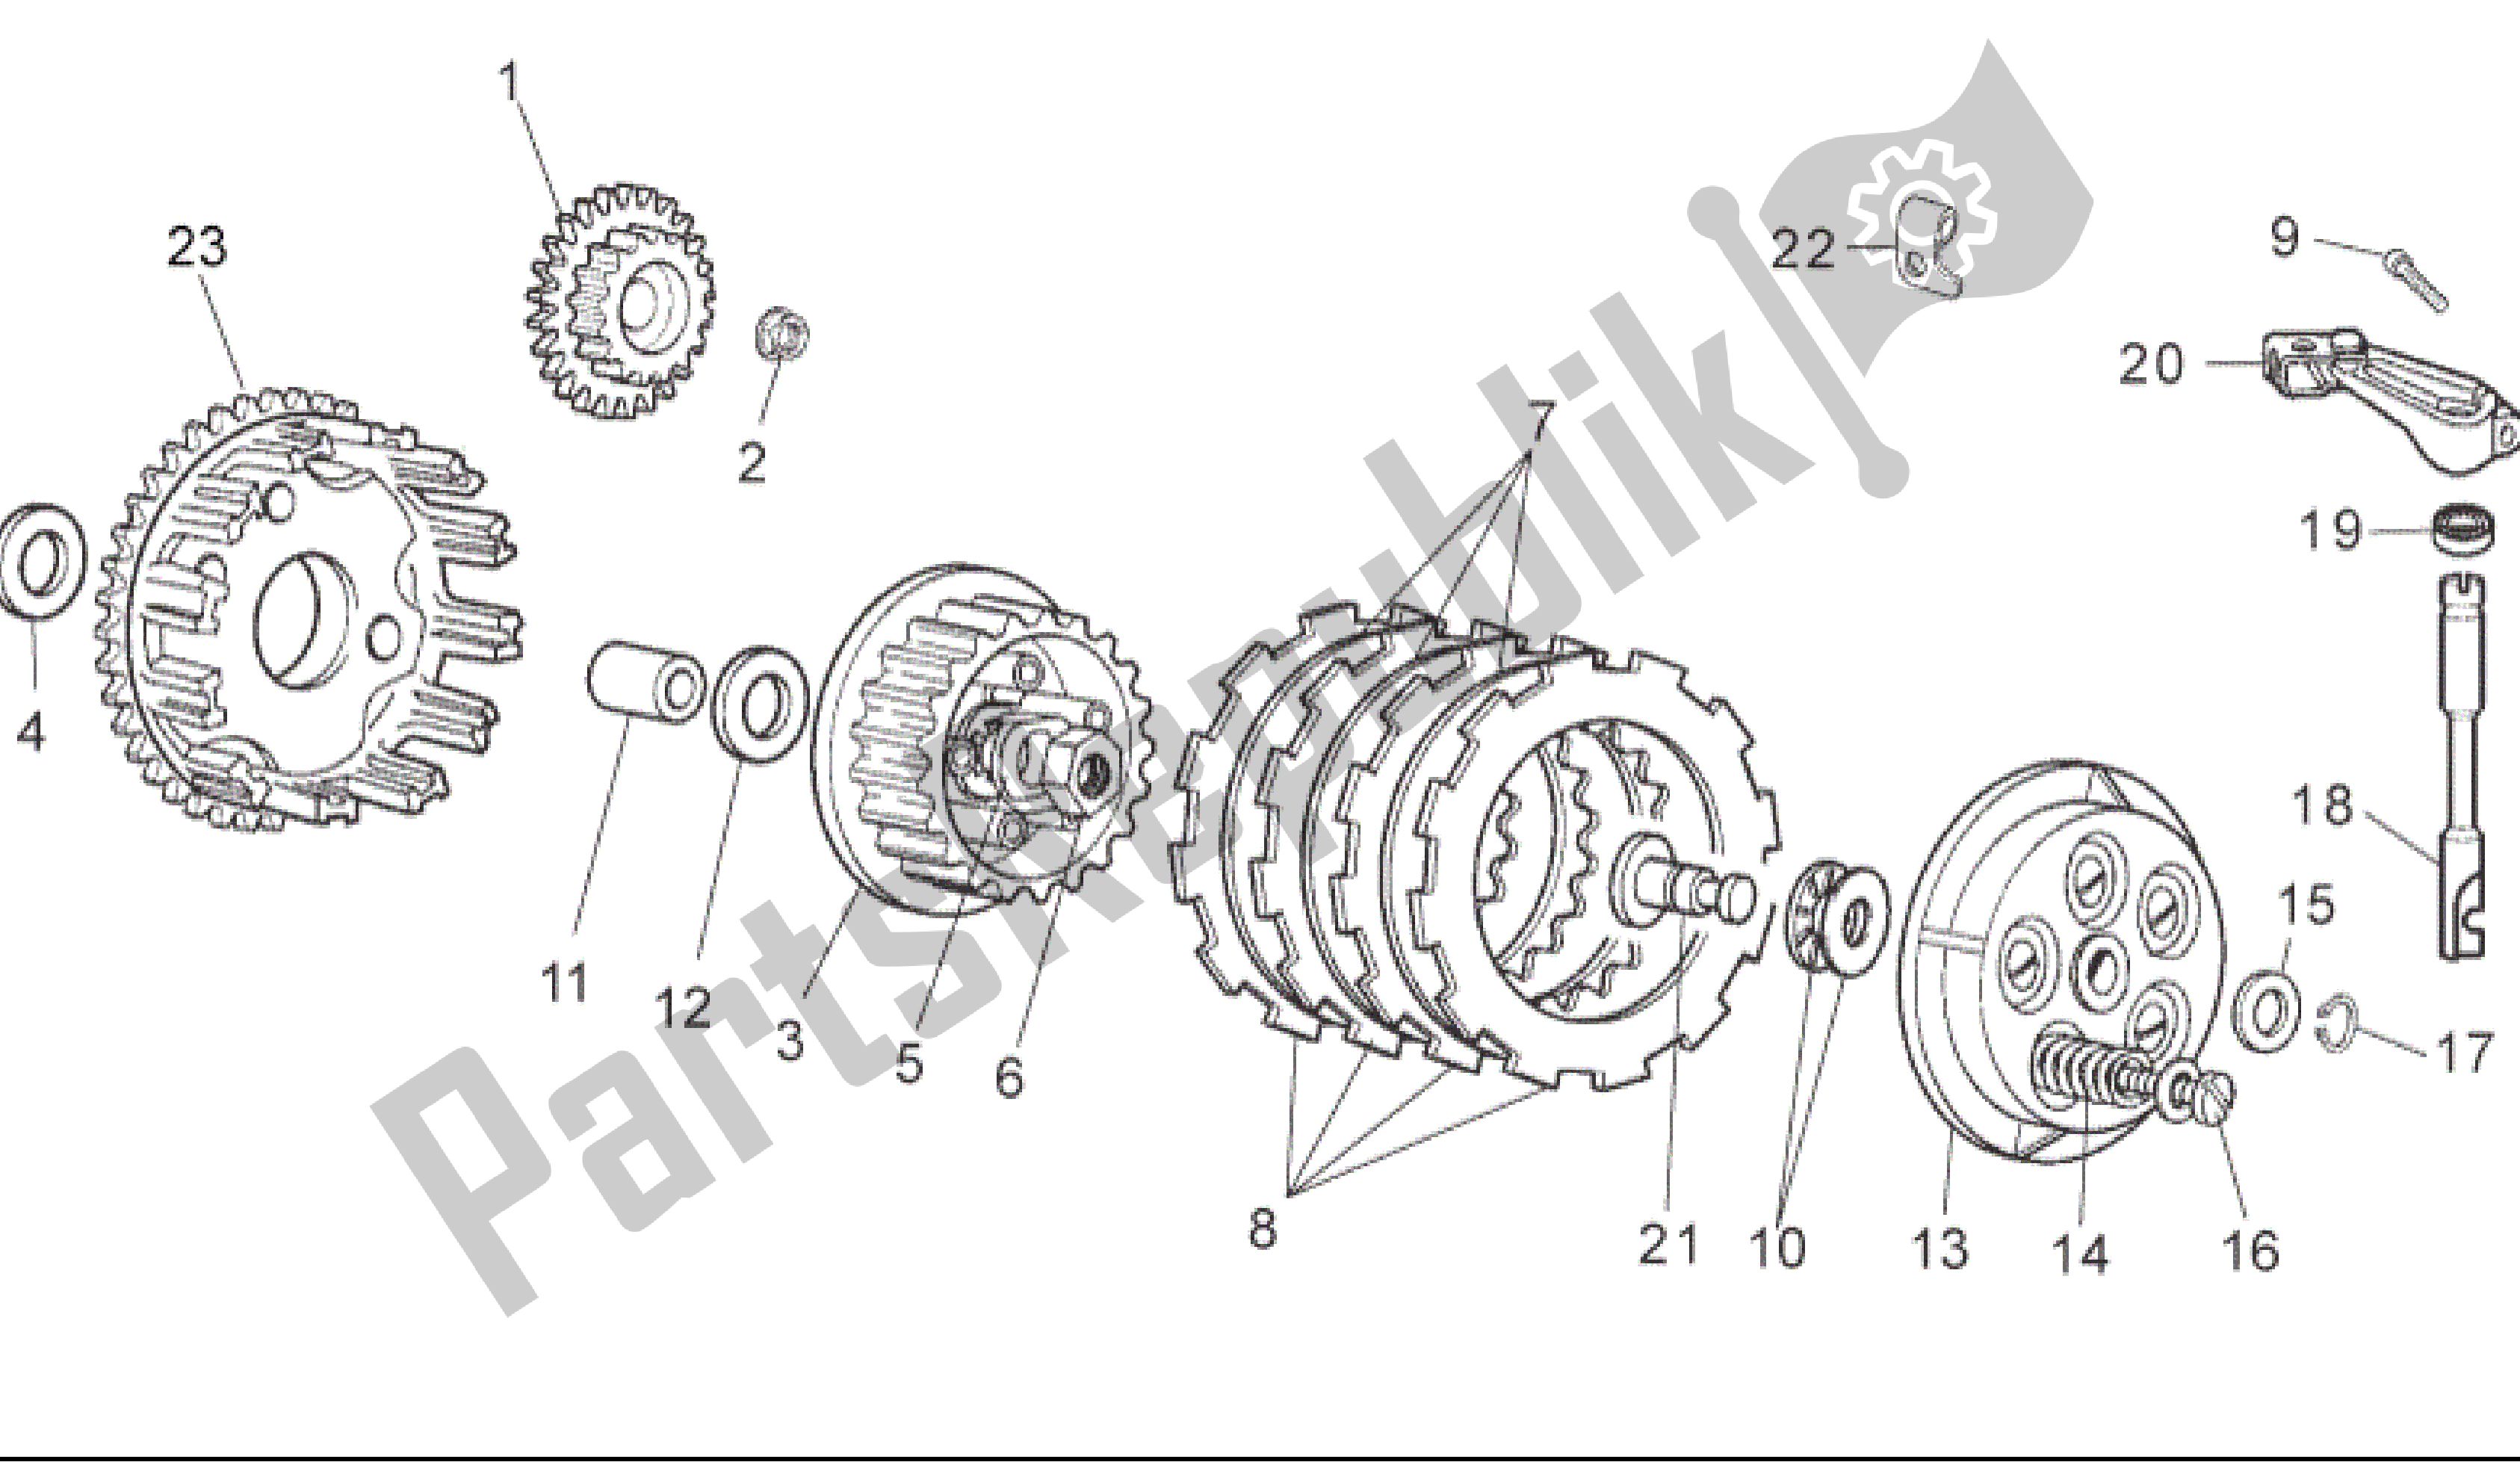 All parts for the Clutch of the Aprilia RS 50 2006 - 2010